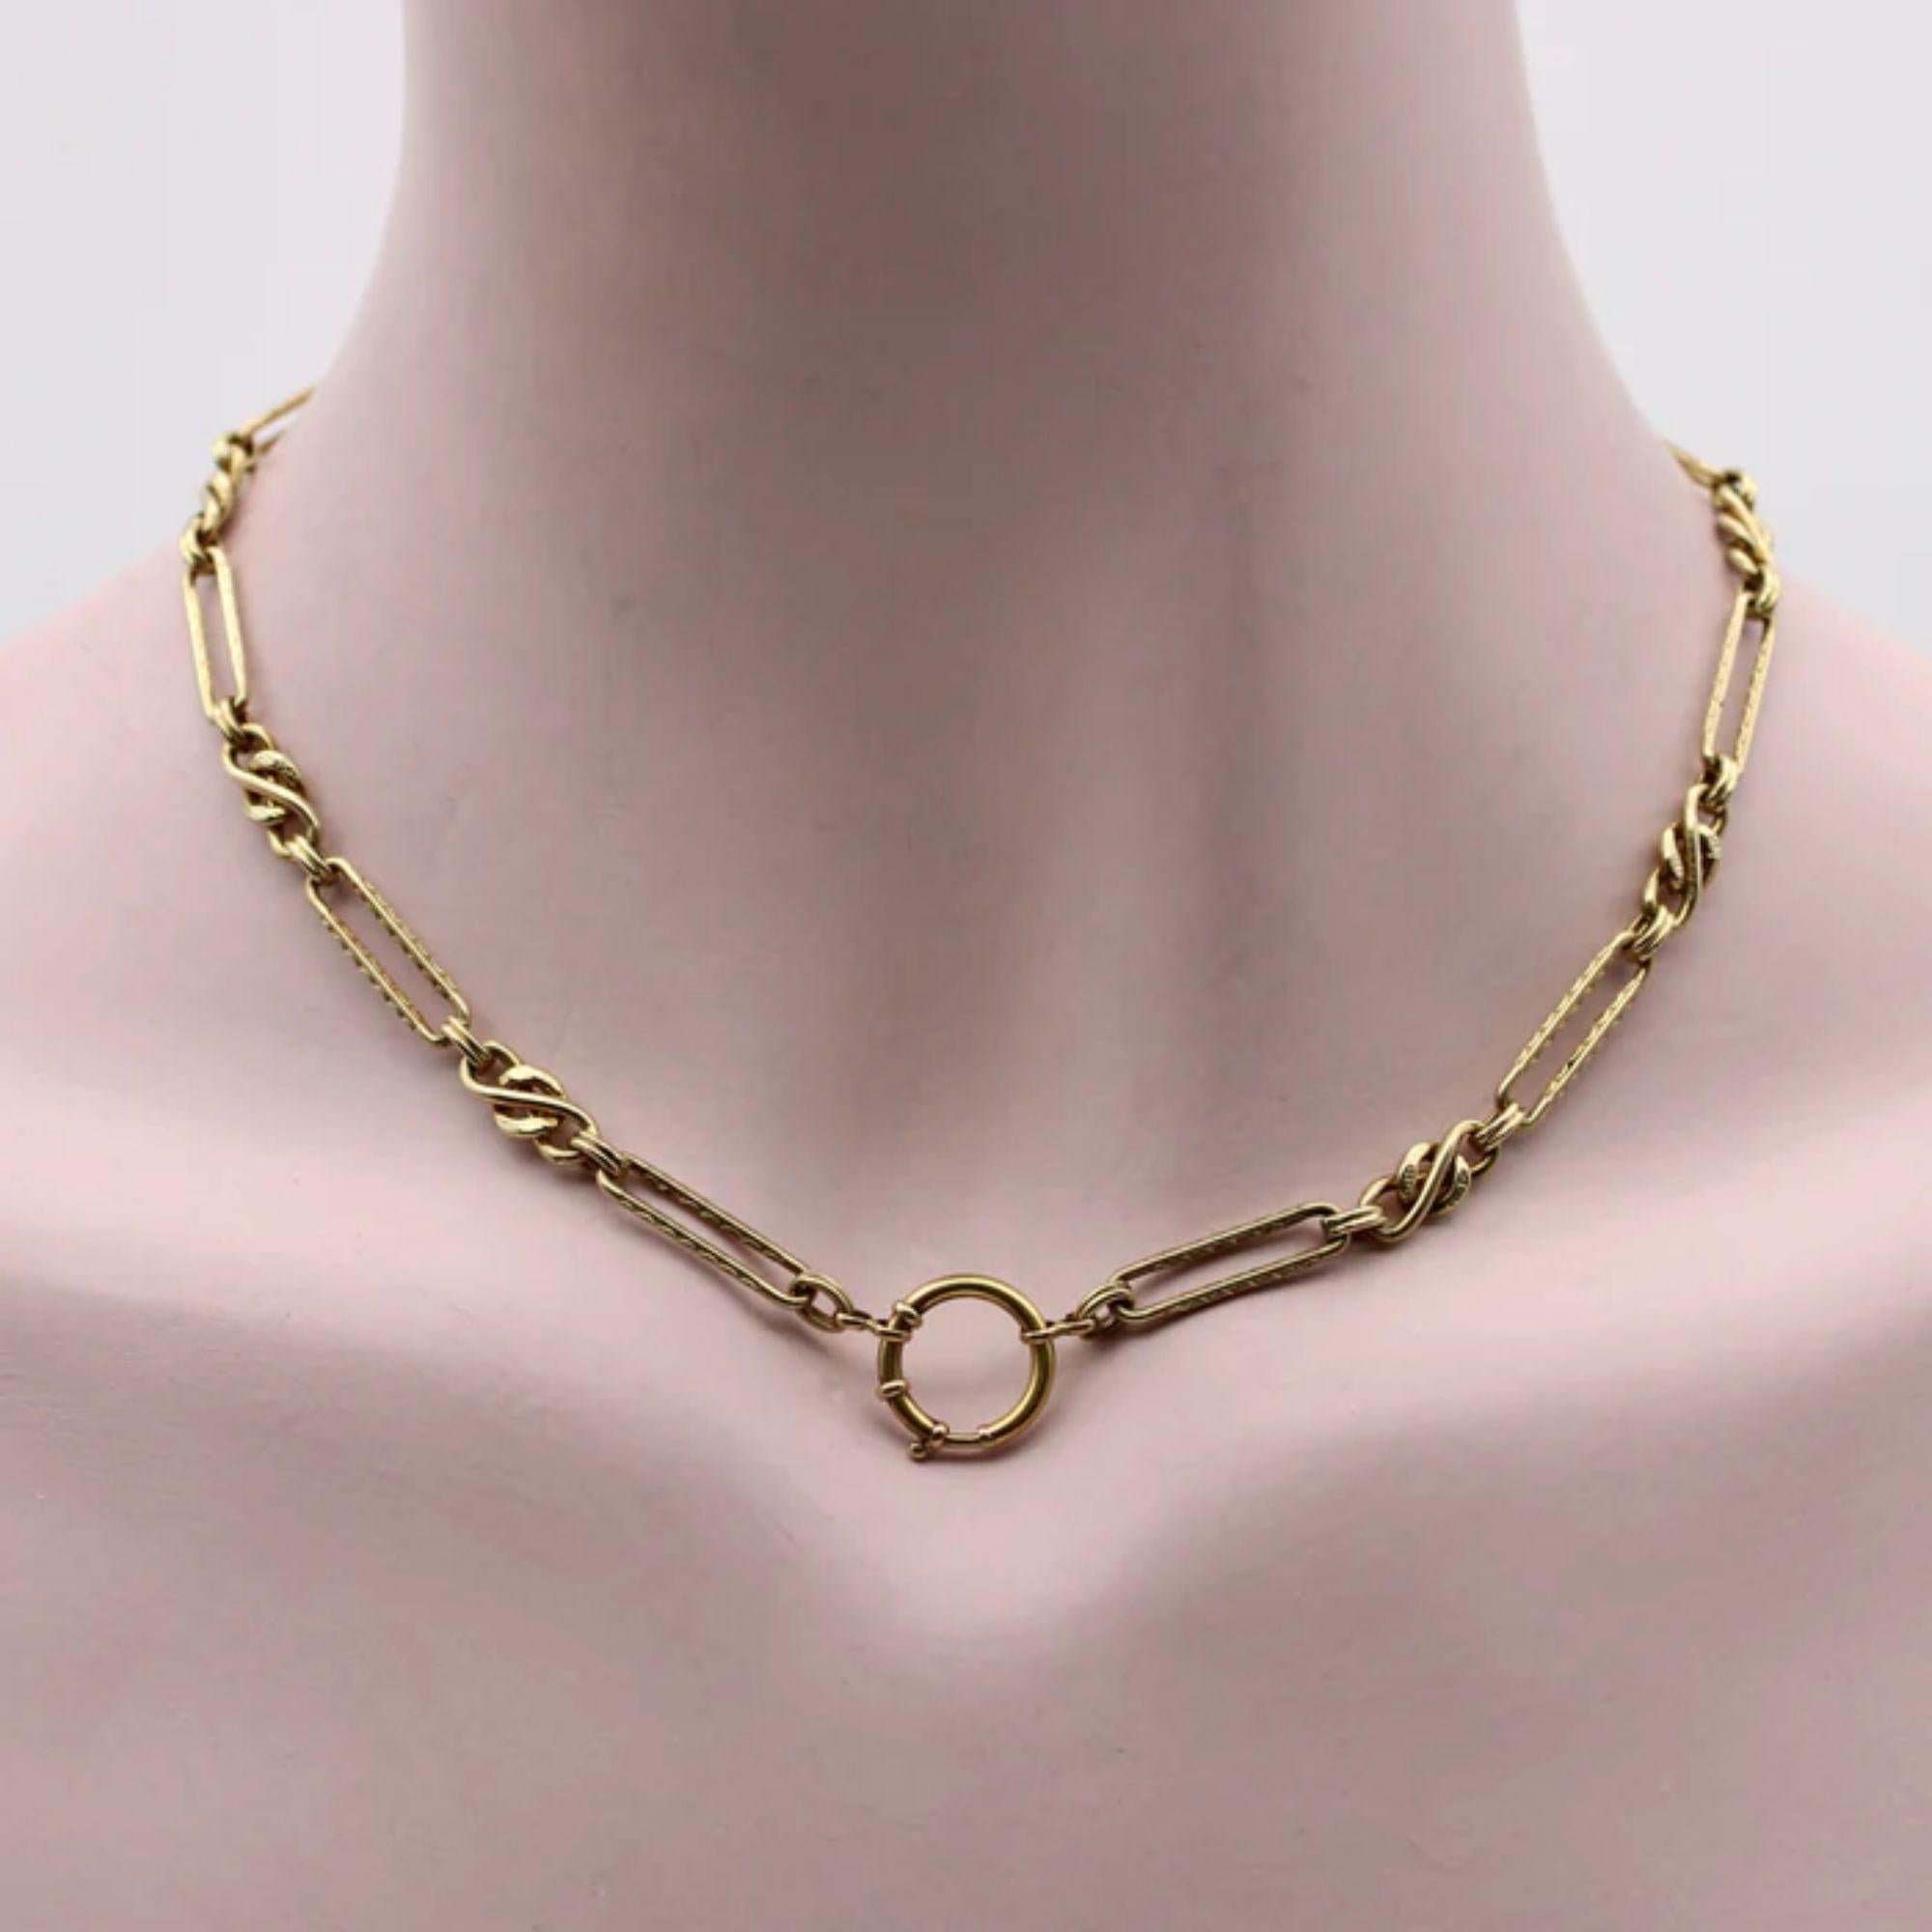 Contemporary Signature Victorian Inspired 14K Gold Fancy Link Chain For Sale